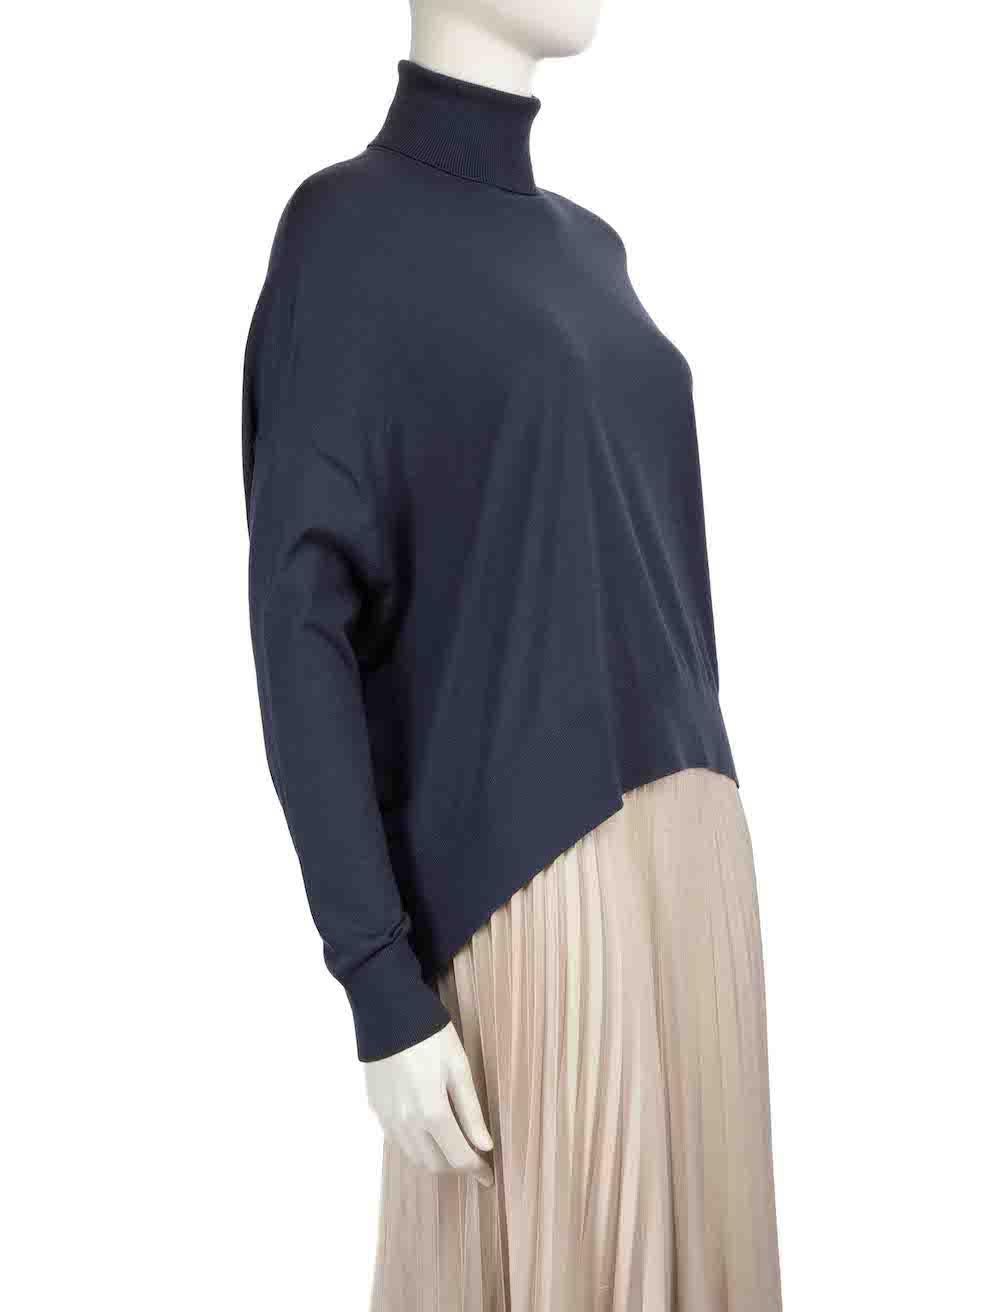 CONDITION is Very good. Hardly any visible wear to jumper is evident on this used Brunello Cucinelli designer resale item.
 
 
 
 Details
 
 
 Blue
 
 Cashmere
 
 Knit jumper
 
 Turtleneck
 
 Long sleeves
 
 Back cut out detail
 
 
 
 
 
 Made in